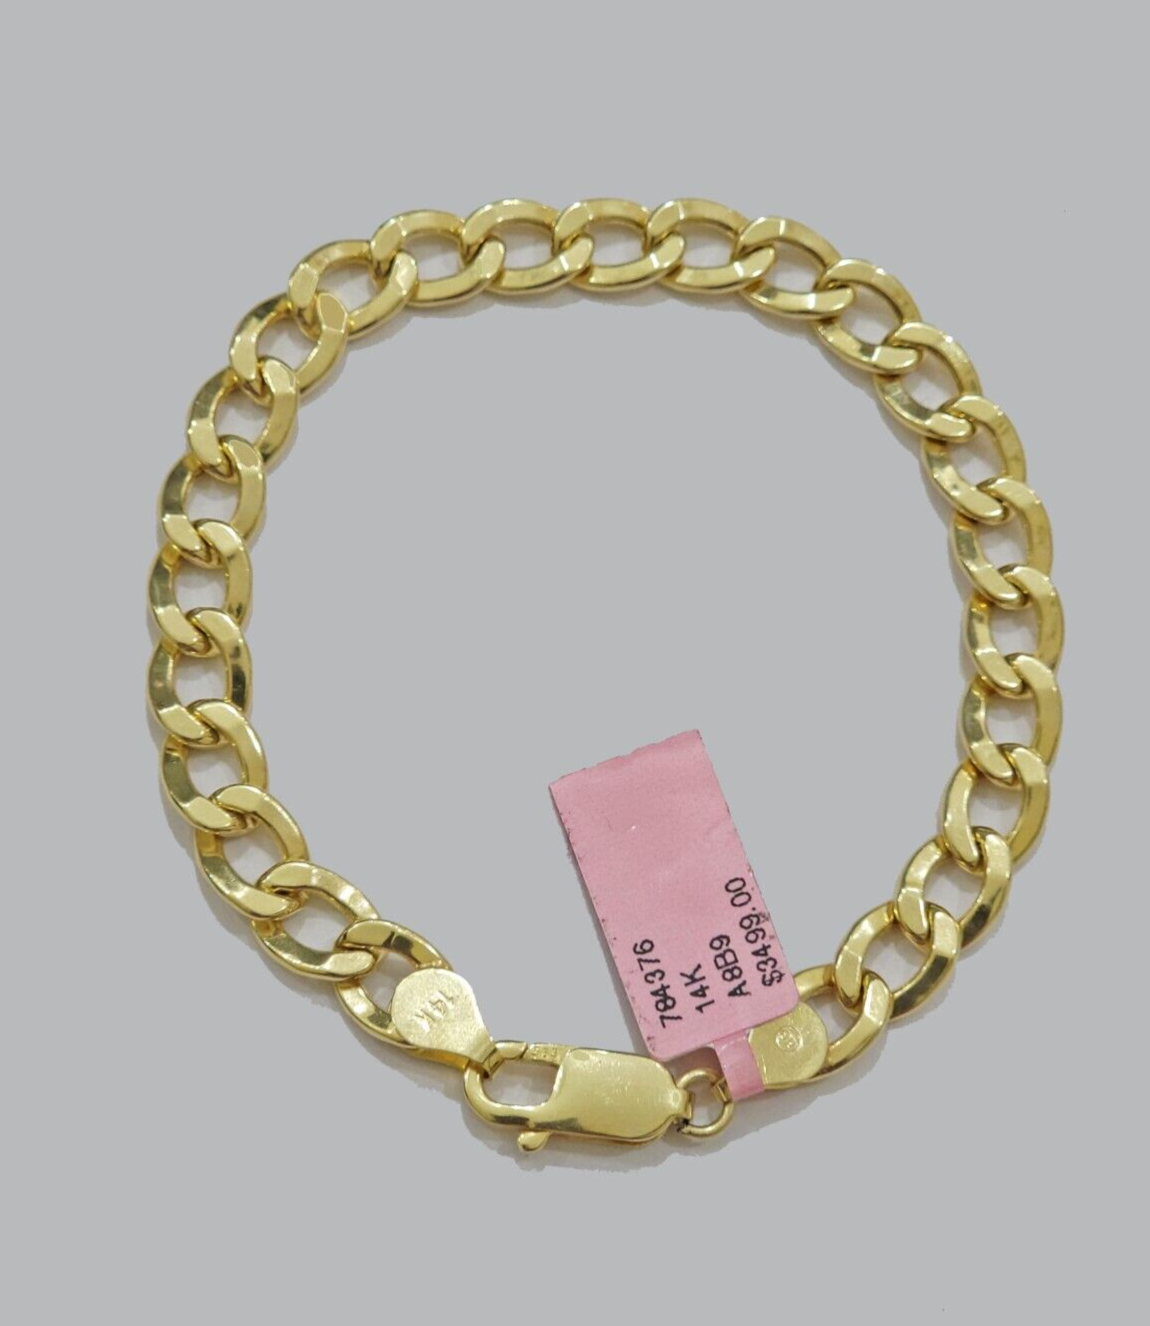 Real 14k Yellow Gold Cuban Curb Bracelet 8mm 8 Inch Lobster Clasp 14 KT New SALE